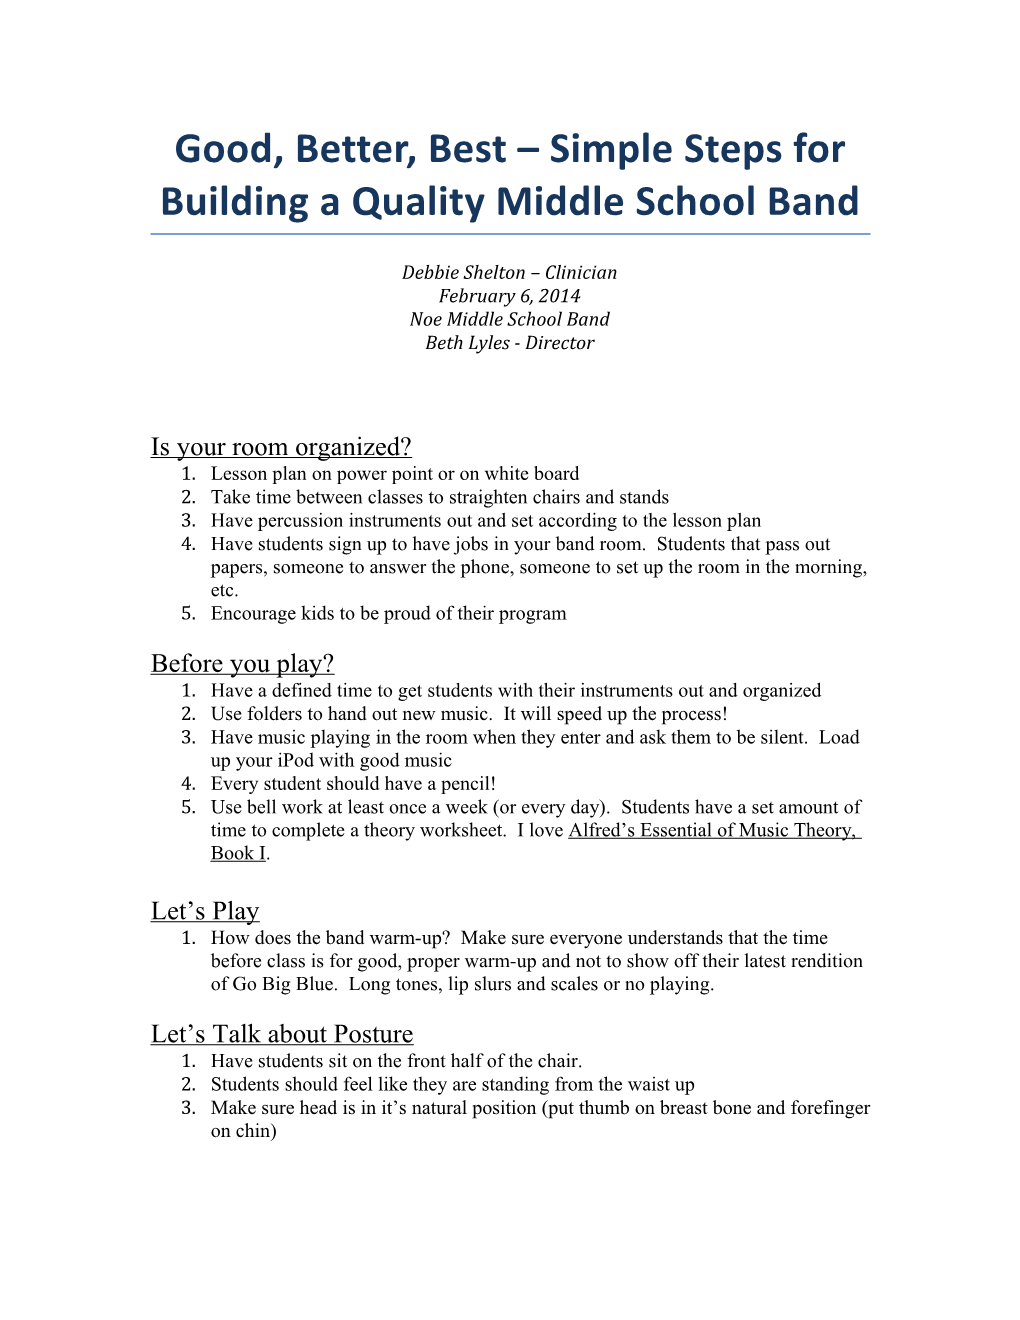 Good, Better, Best Simple Steps Forbuilding a Quality Middle School Band